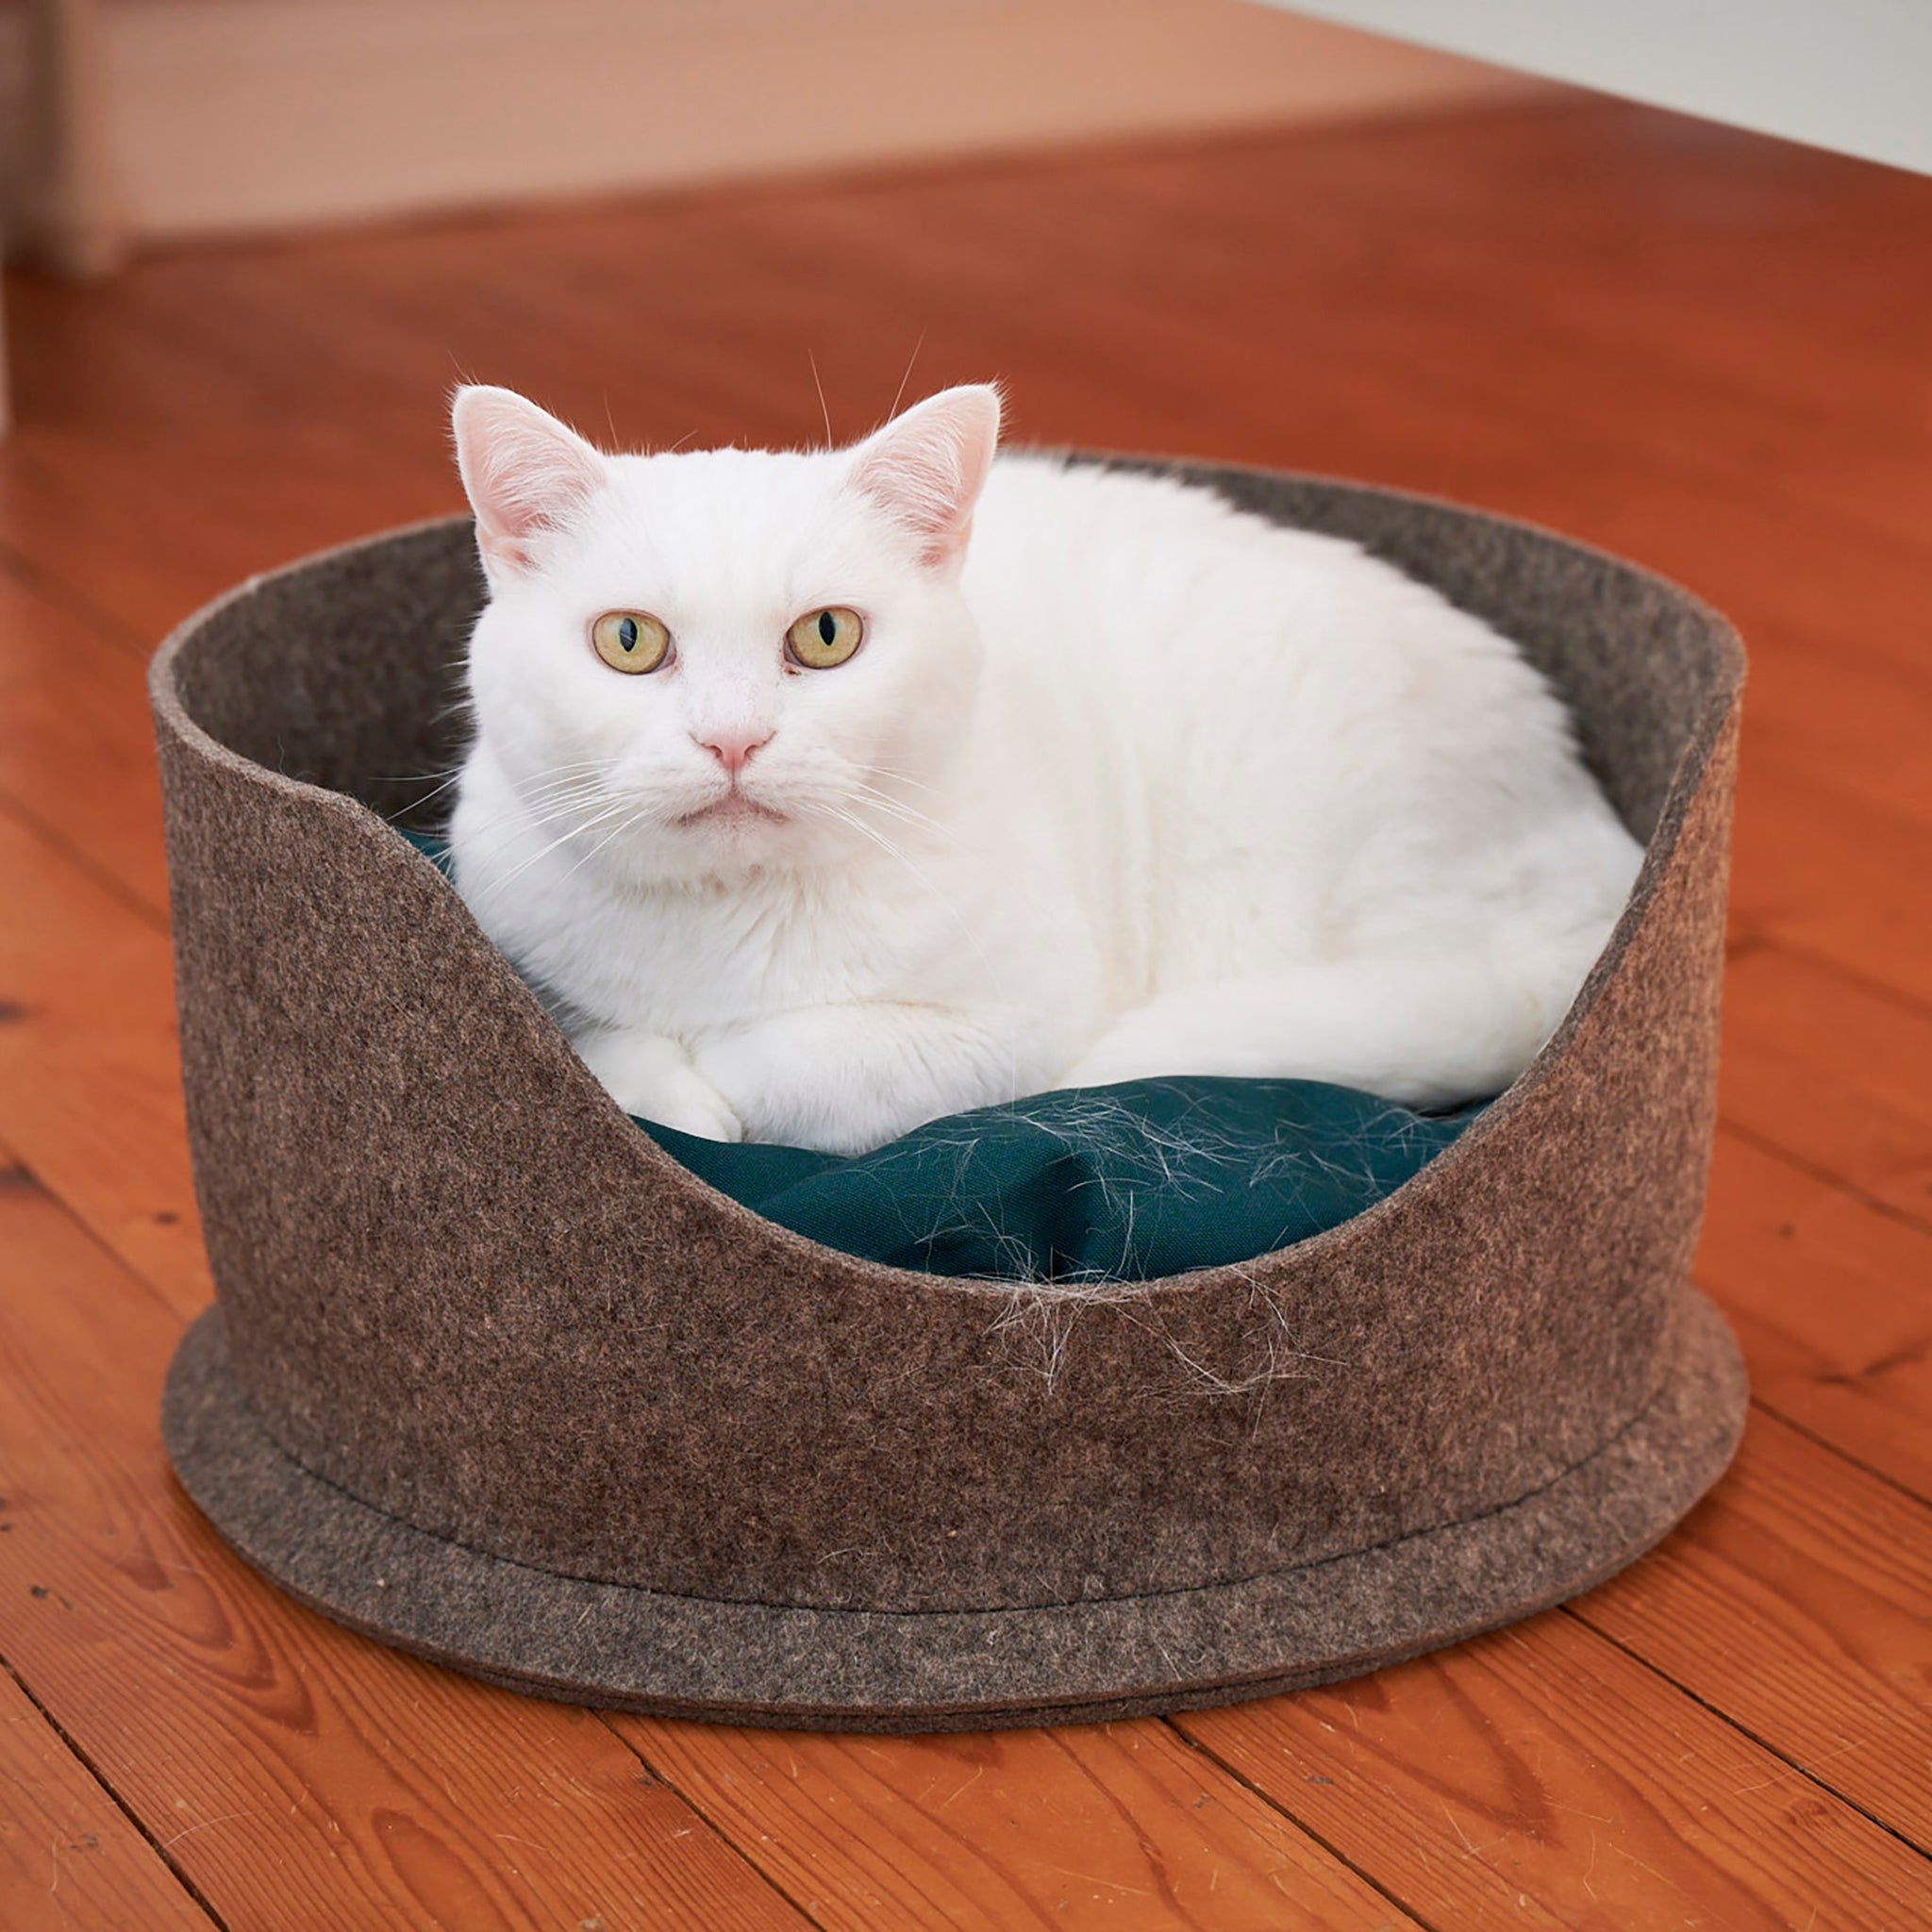 A white cat with yellow eyes, sitting inside a Chimney Sheep PteSnug wool felt cat bed. The bed is sitting on a wooden floor. The cat is staring forwards. There is a green wool filled cushion inside the bed.